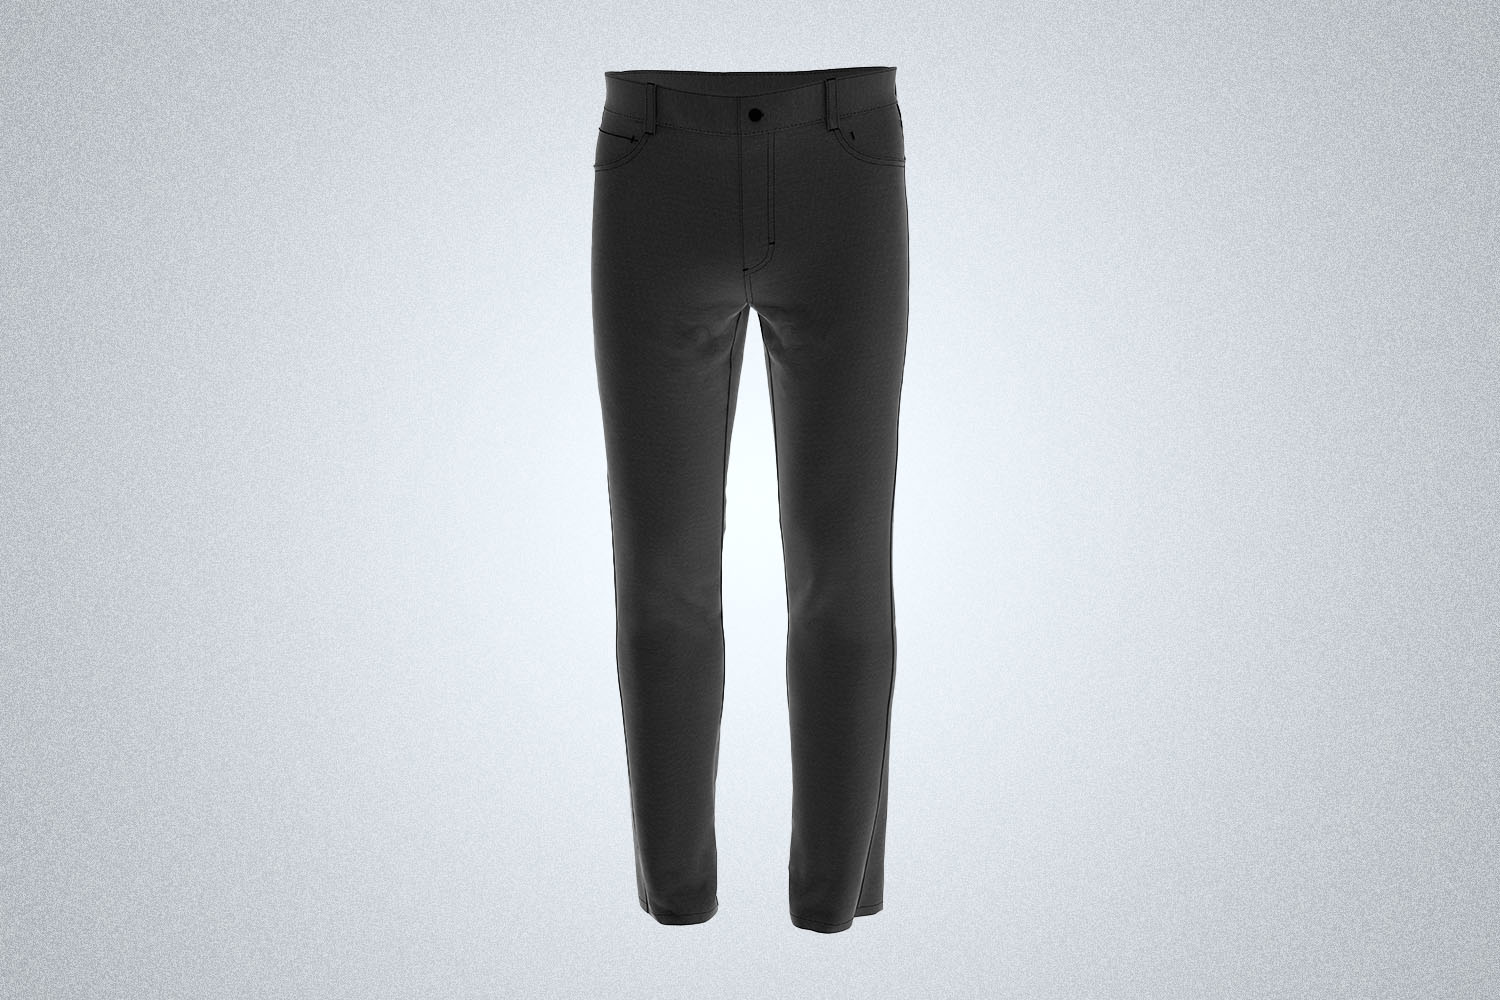 The Callaway Everplay 5-Pocket Pant on a gray background